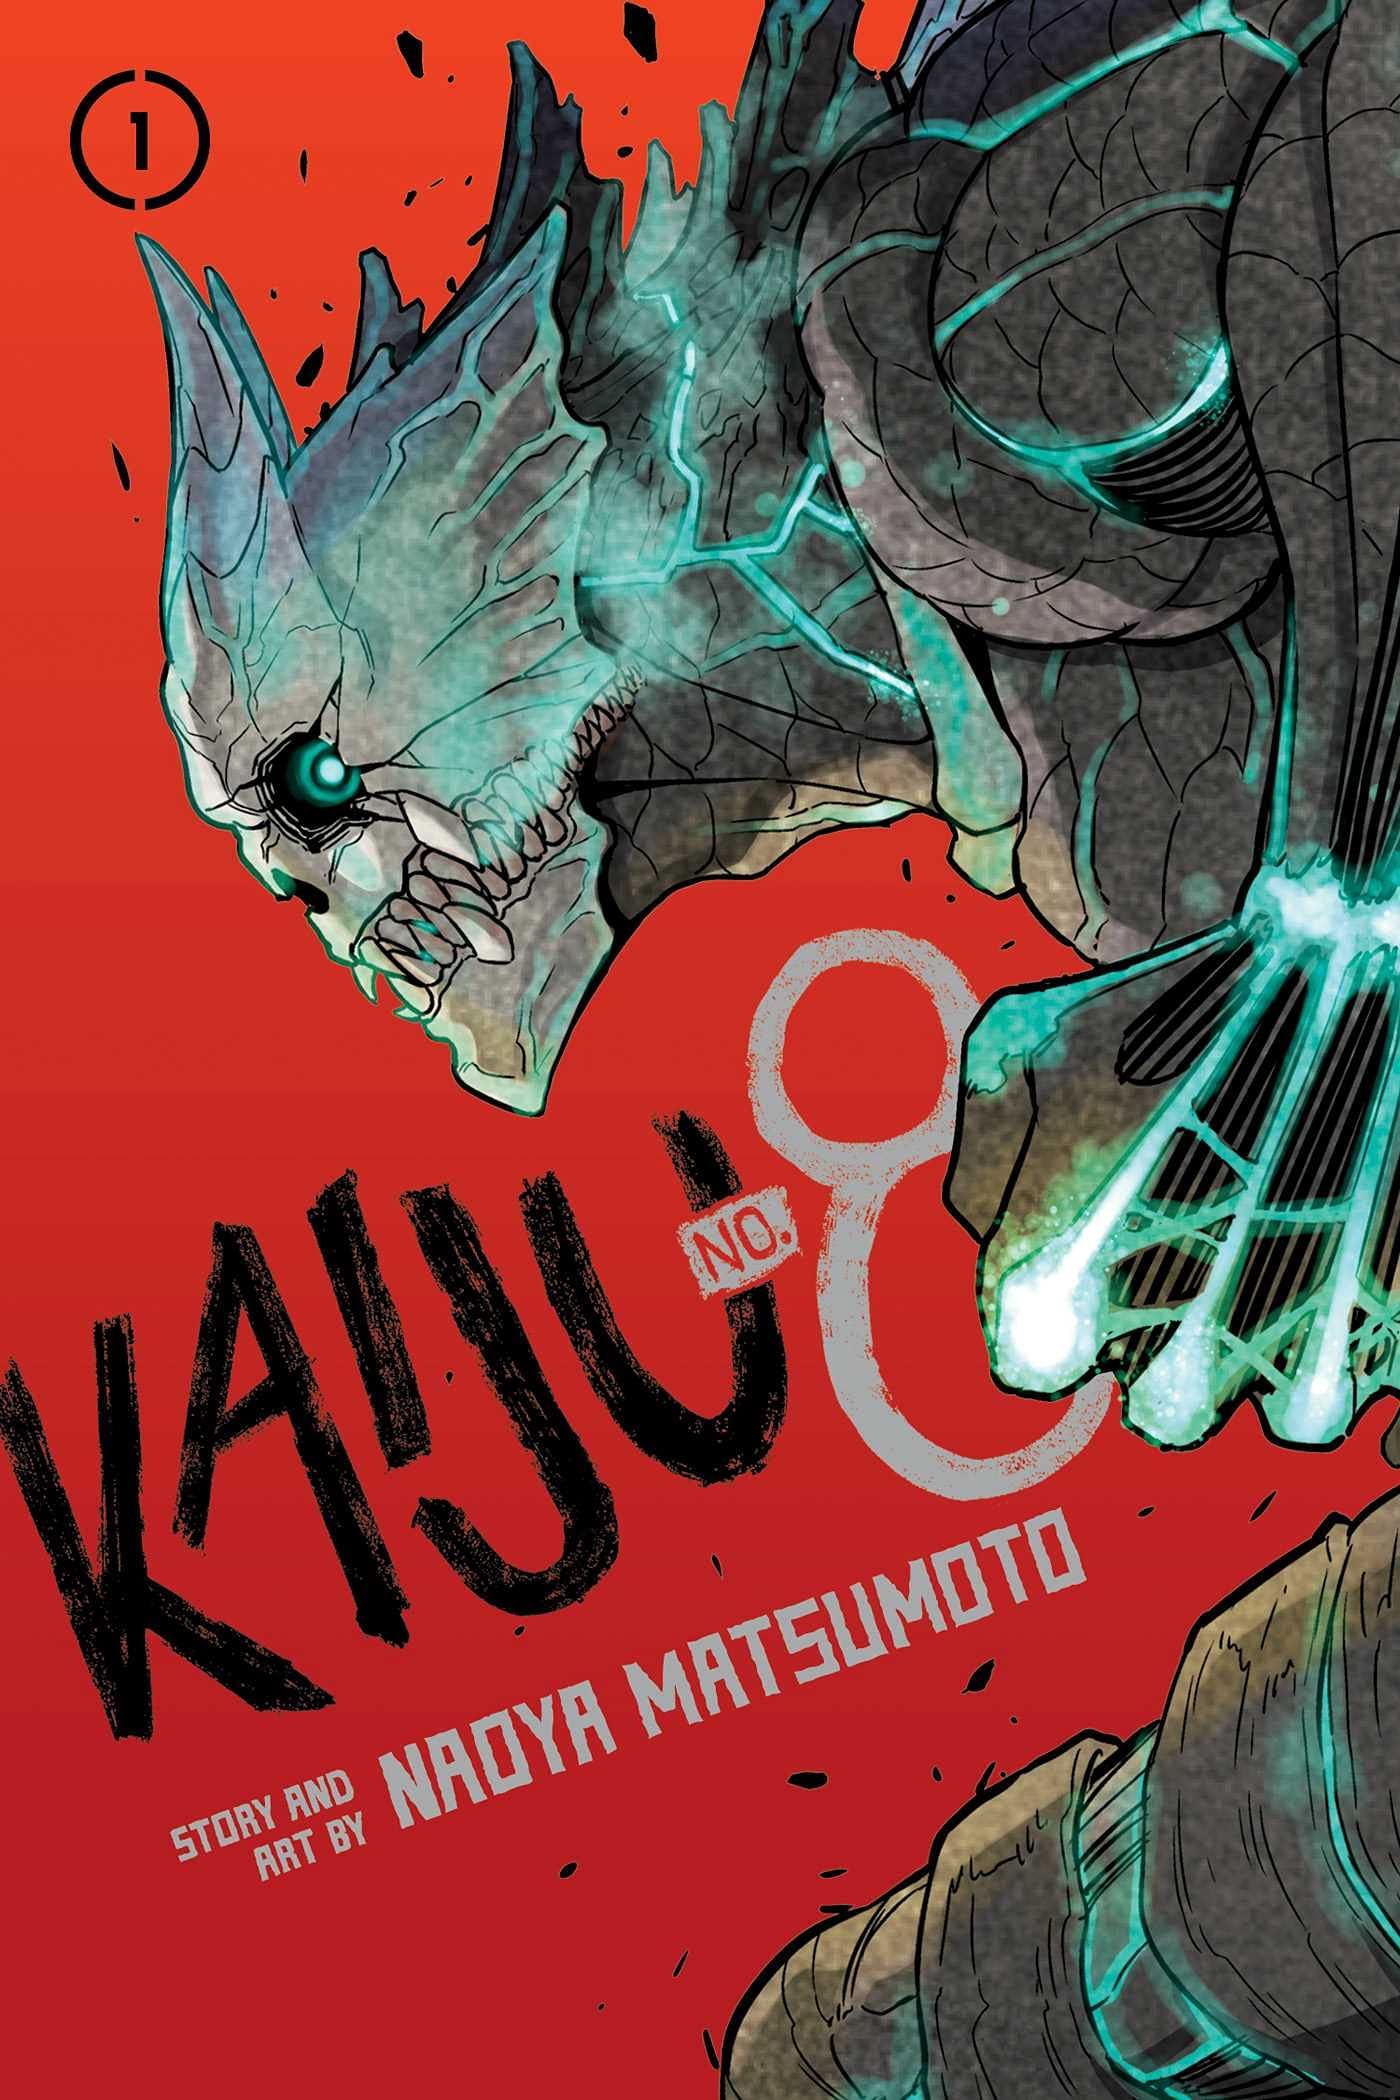 Kaiju No. 8, Vol. 1 Can Become the Next Shonen Hit - If It Fixes Some Kinks